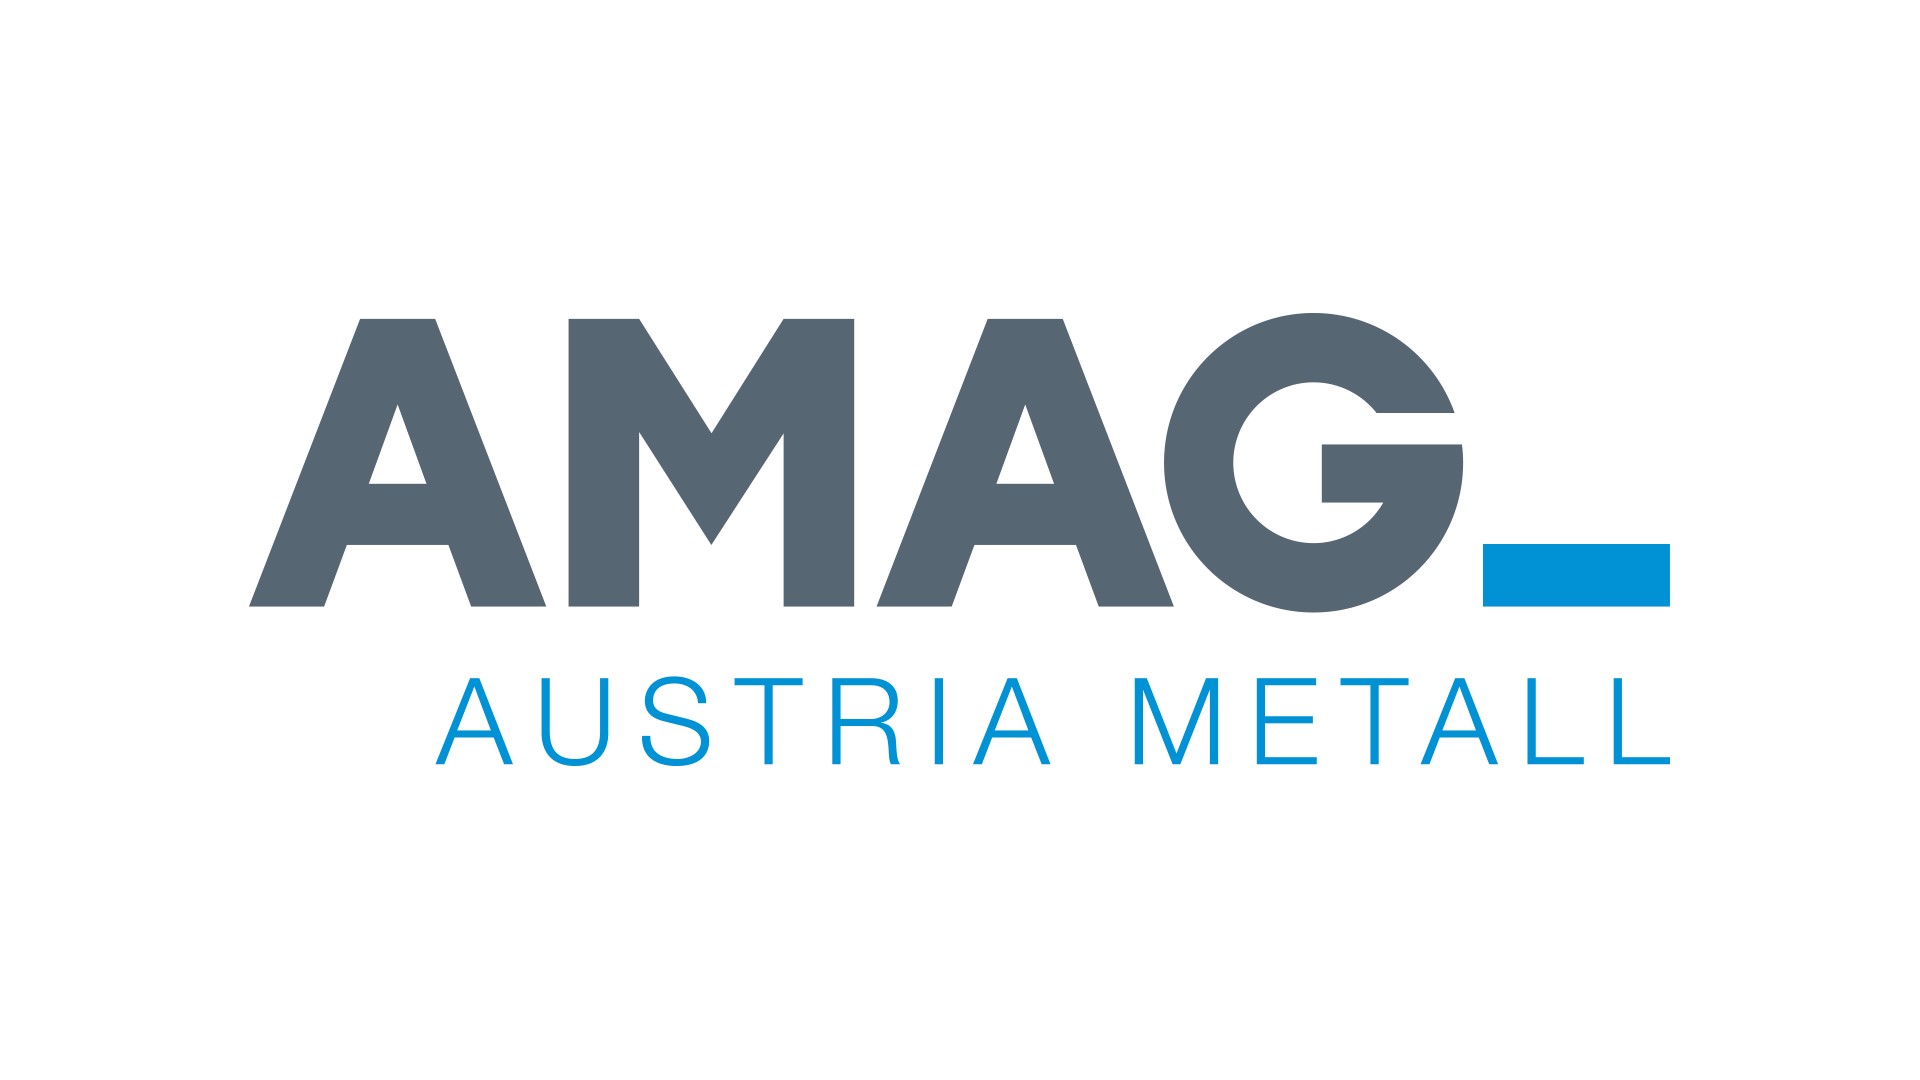 AMAG announces record breaking earnings in Q3 2021 with EBIDTA of 53 million